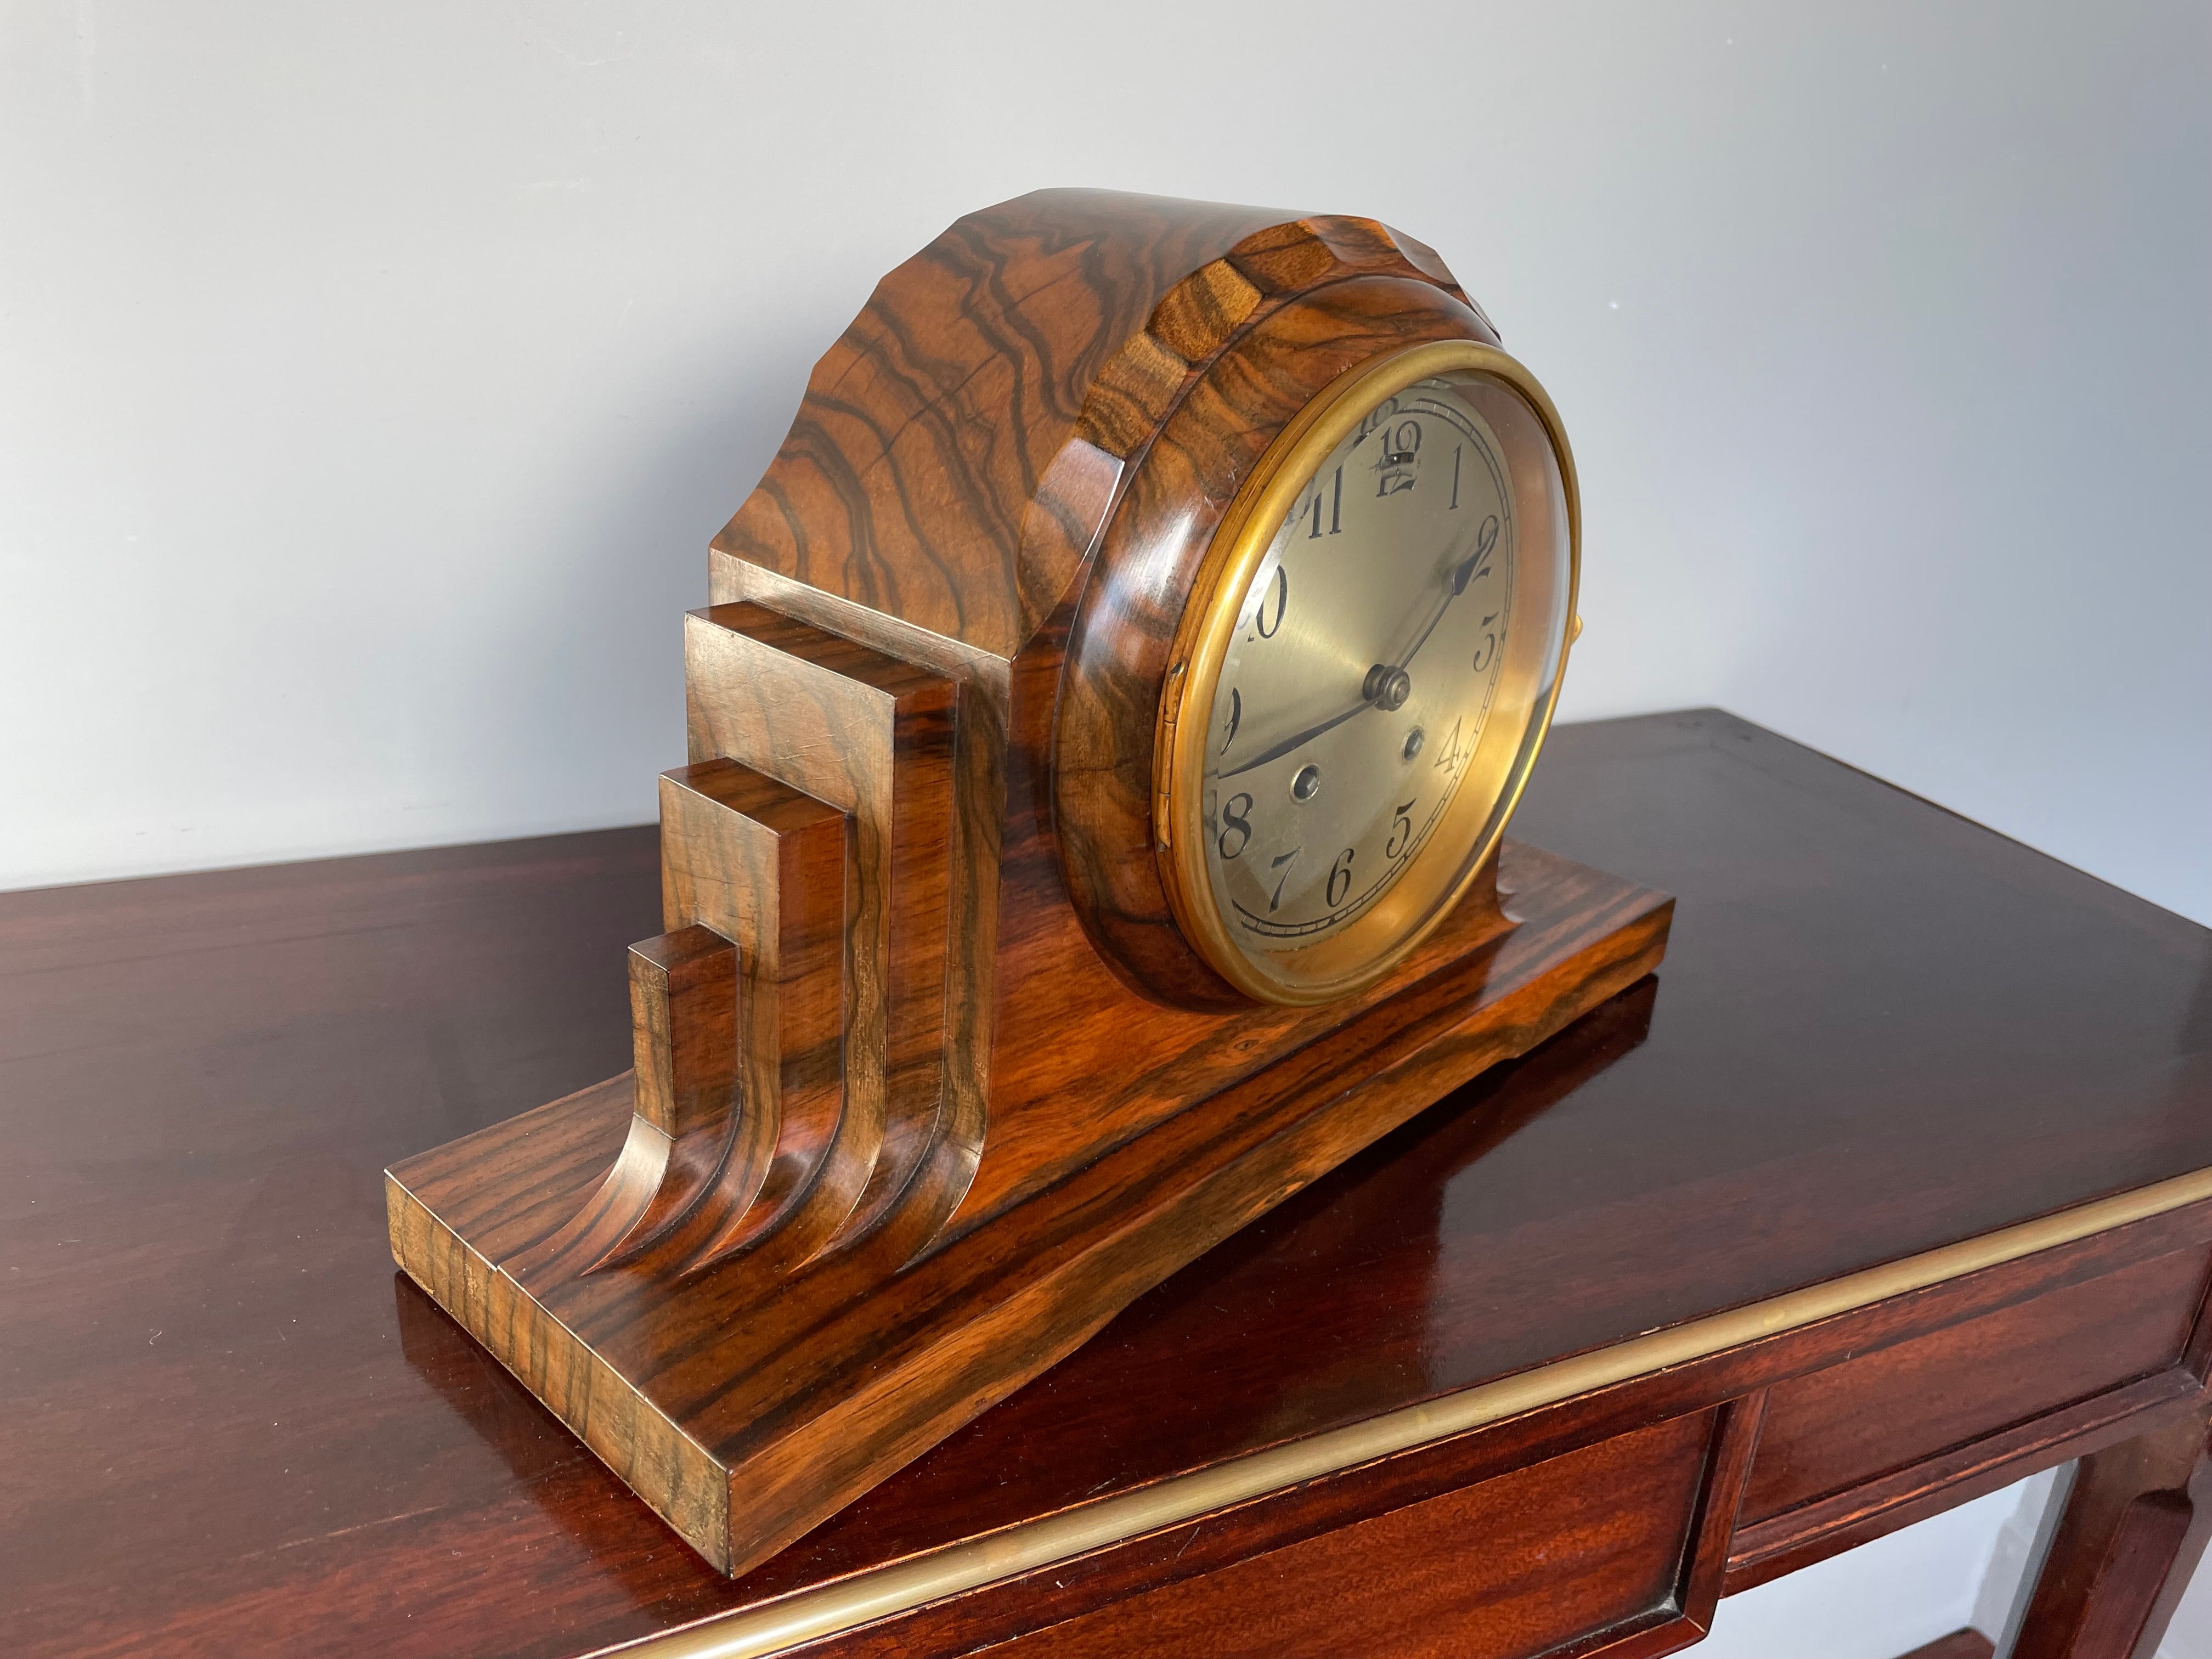 Unique and stunning Art Deco mantel clock.

For most people that were born after, say 1980, it is hard to believe that in the earliest years of the twentieth century a variety of craftsman were still hand-creating unique items. This included